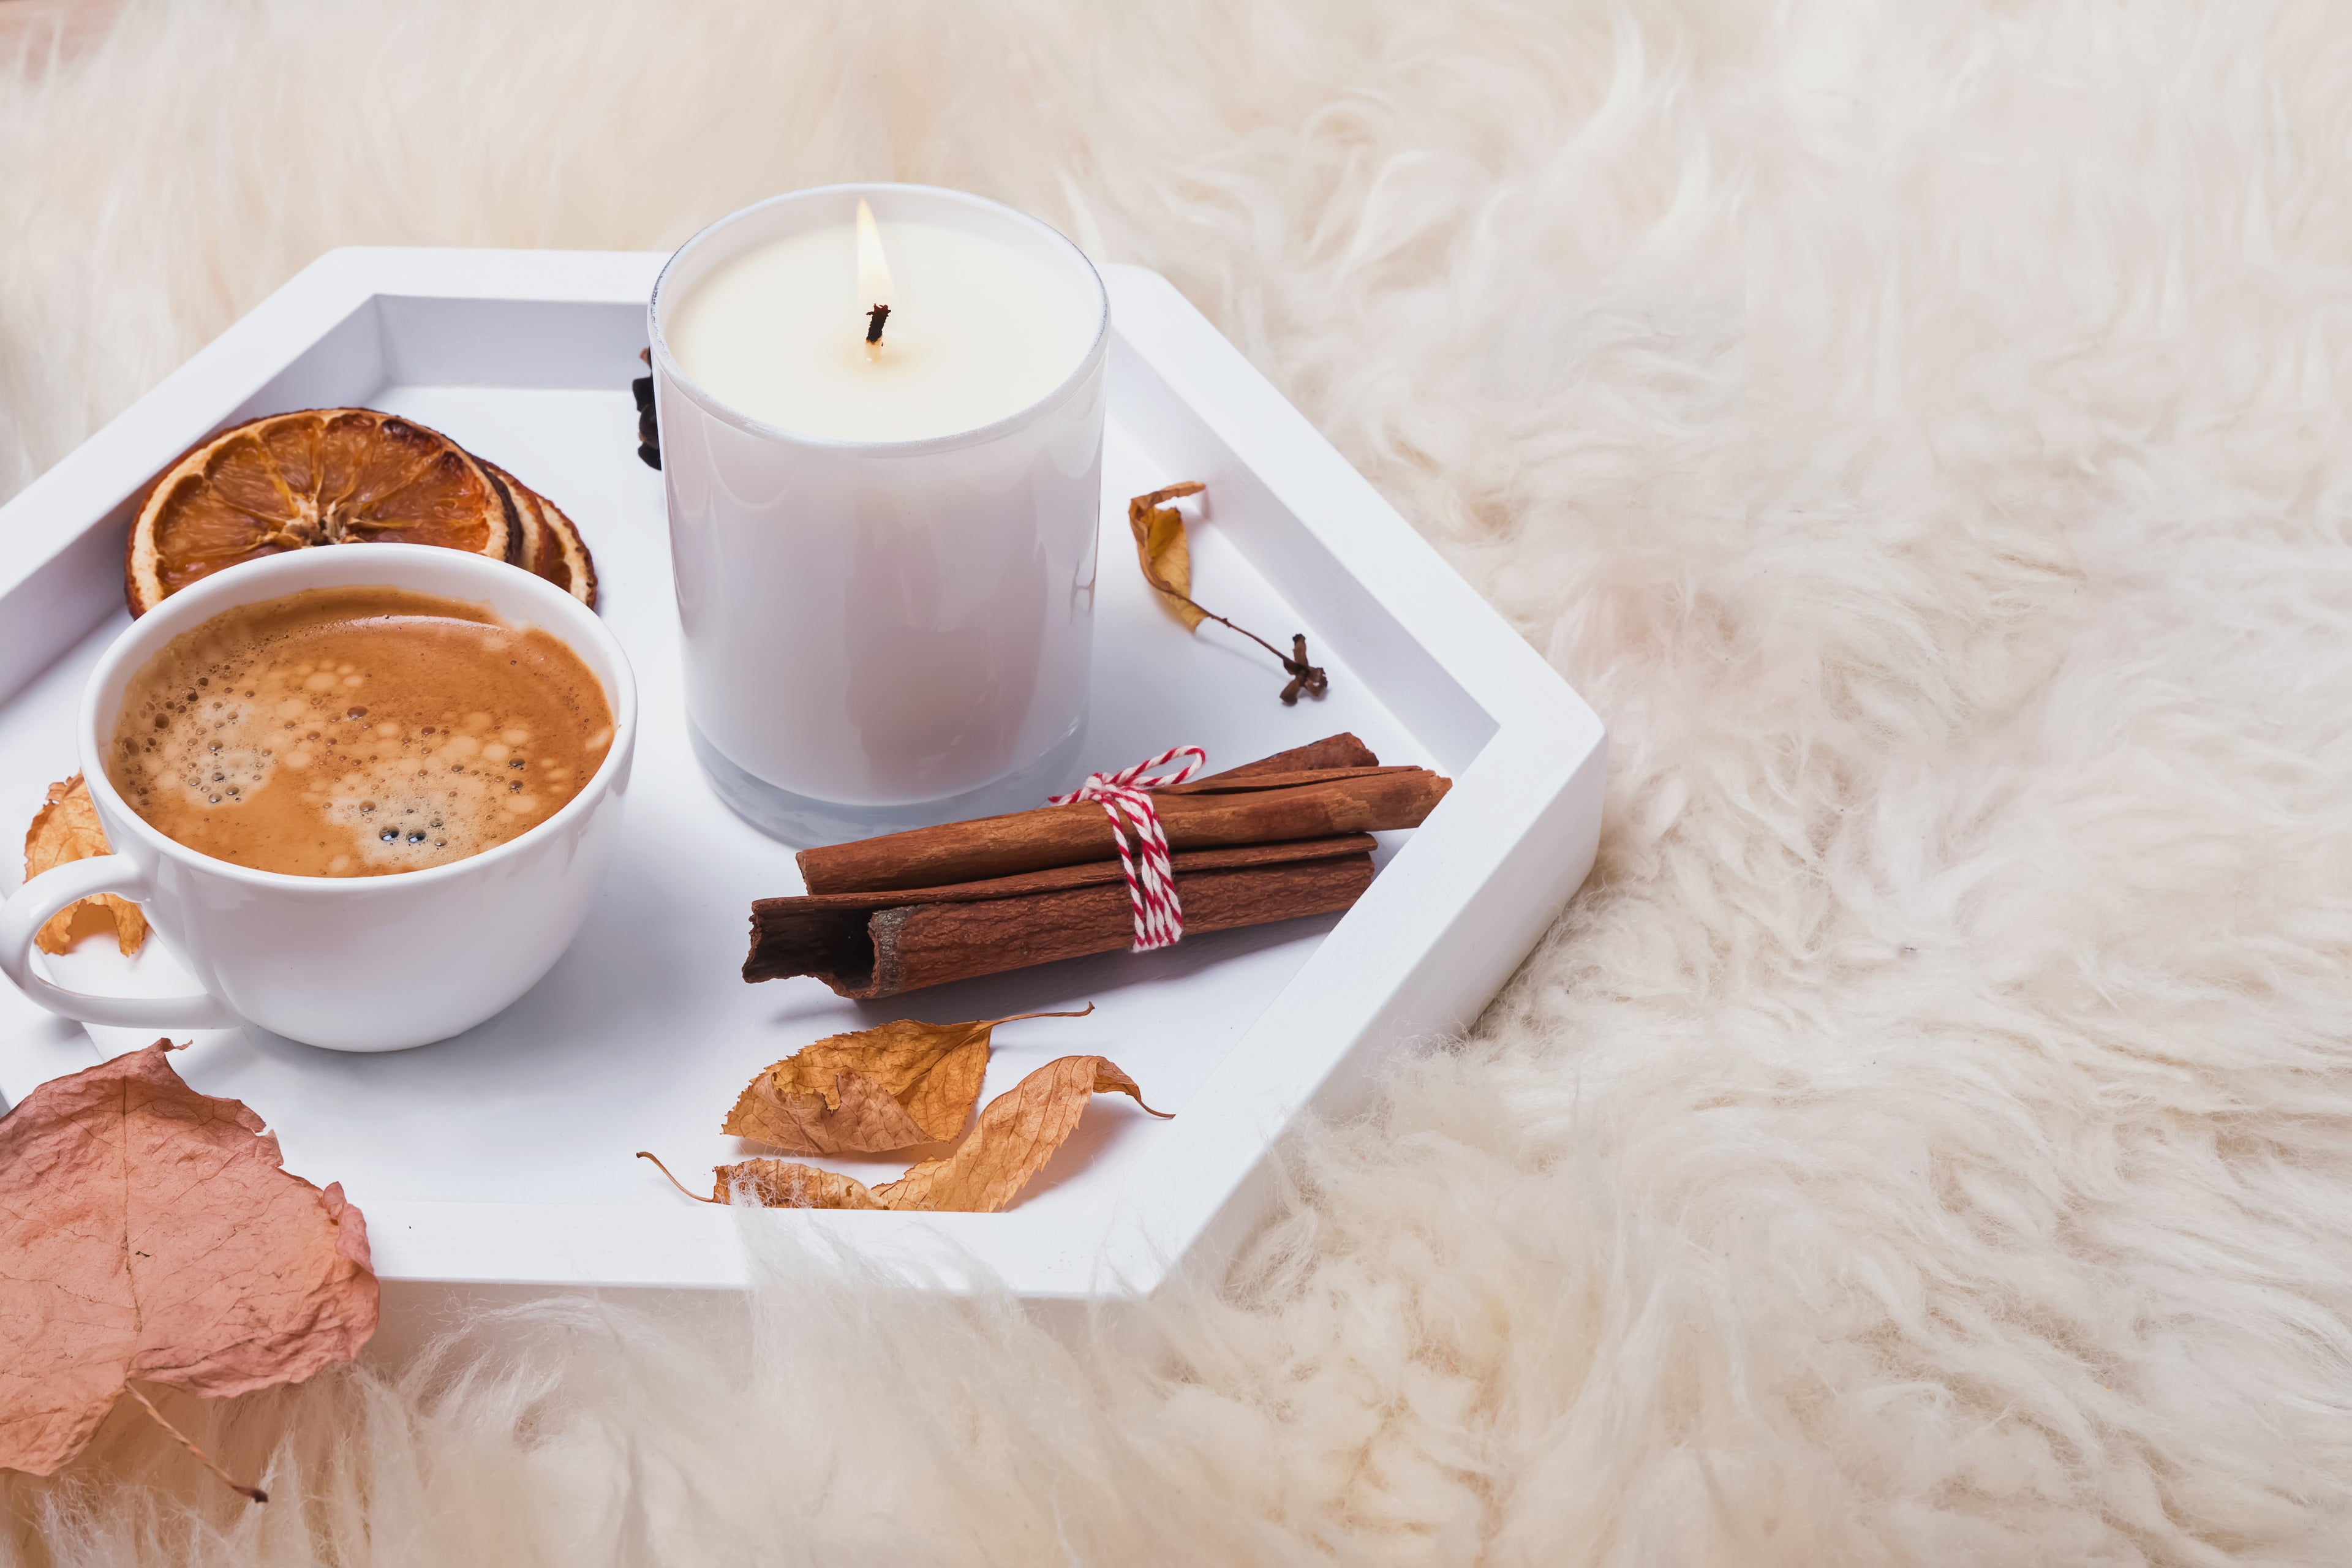 A tray with a burning candle, a hot coffee mug, cinnamon sticks, and some dried oranges laid on a plush shag white rug